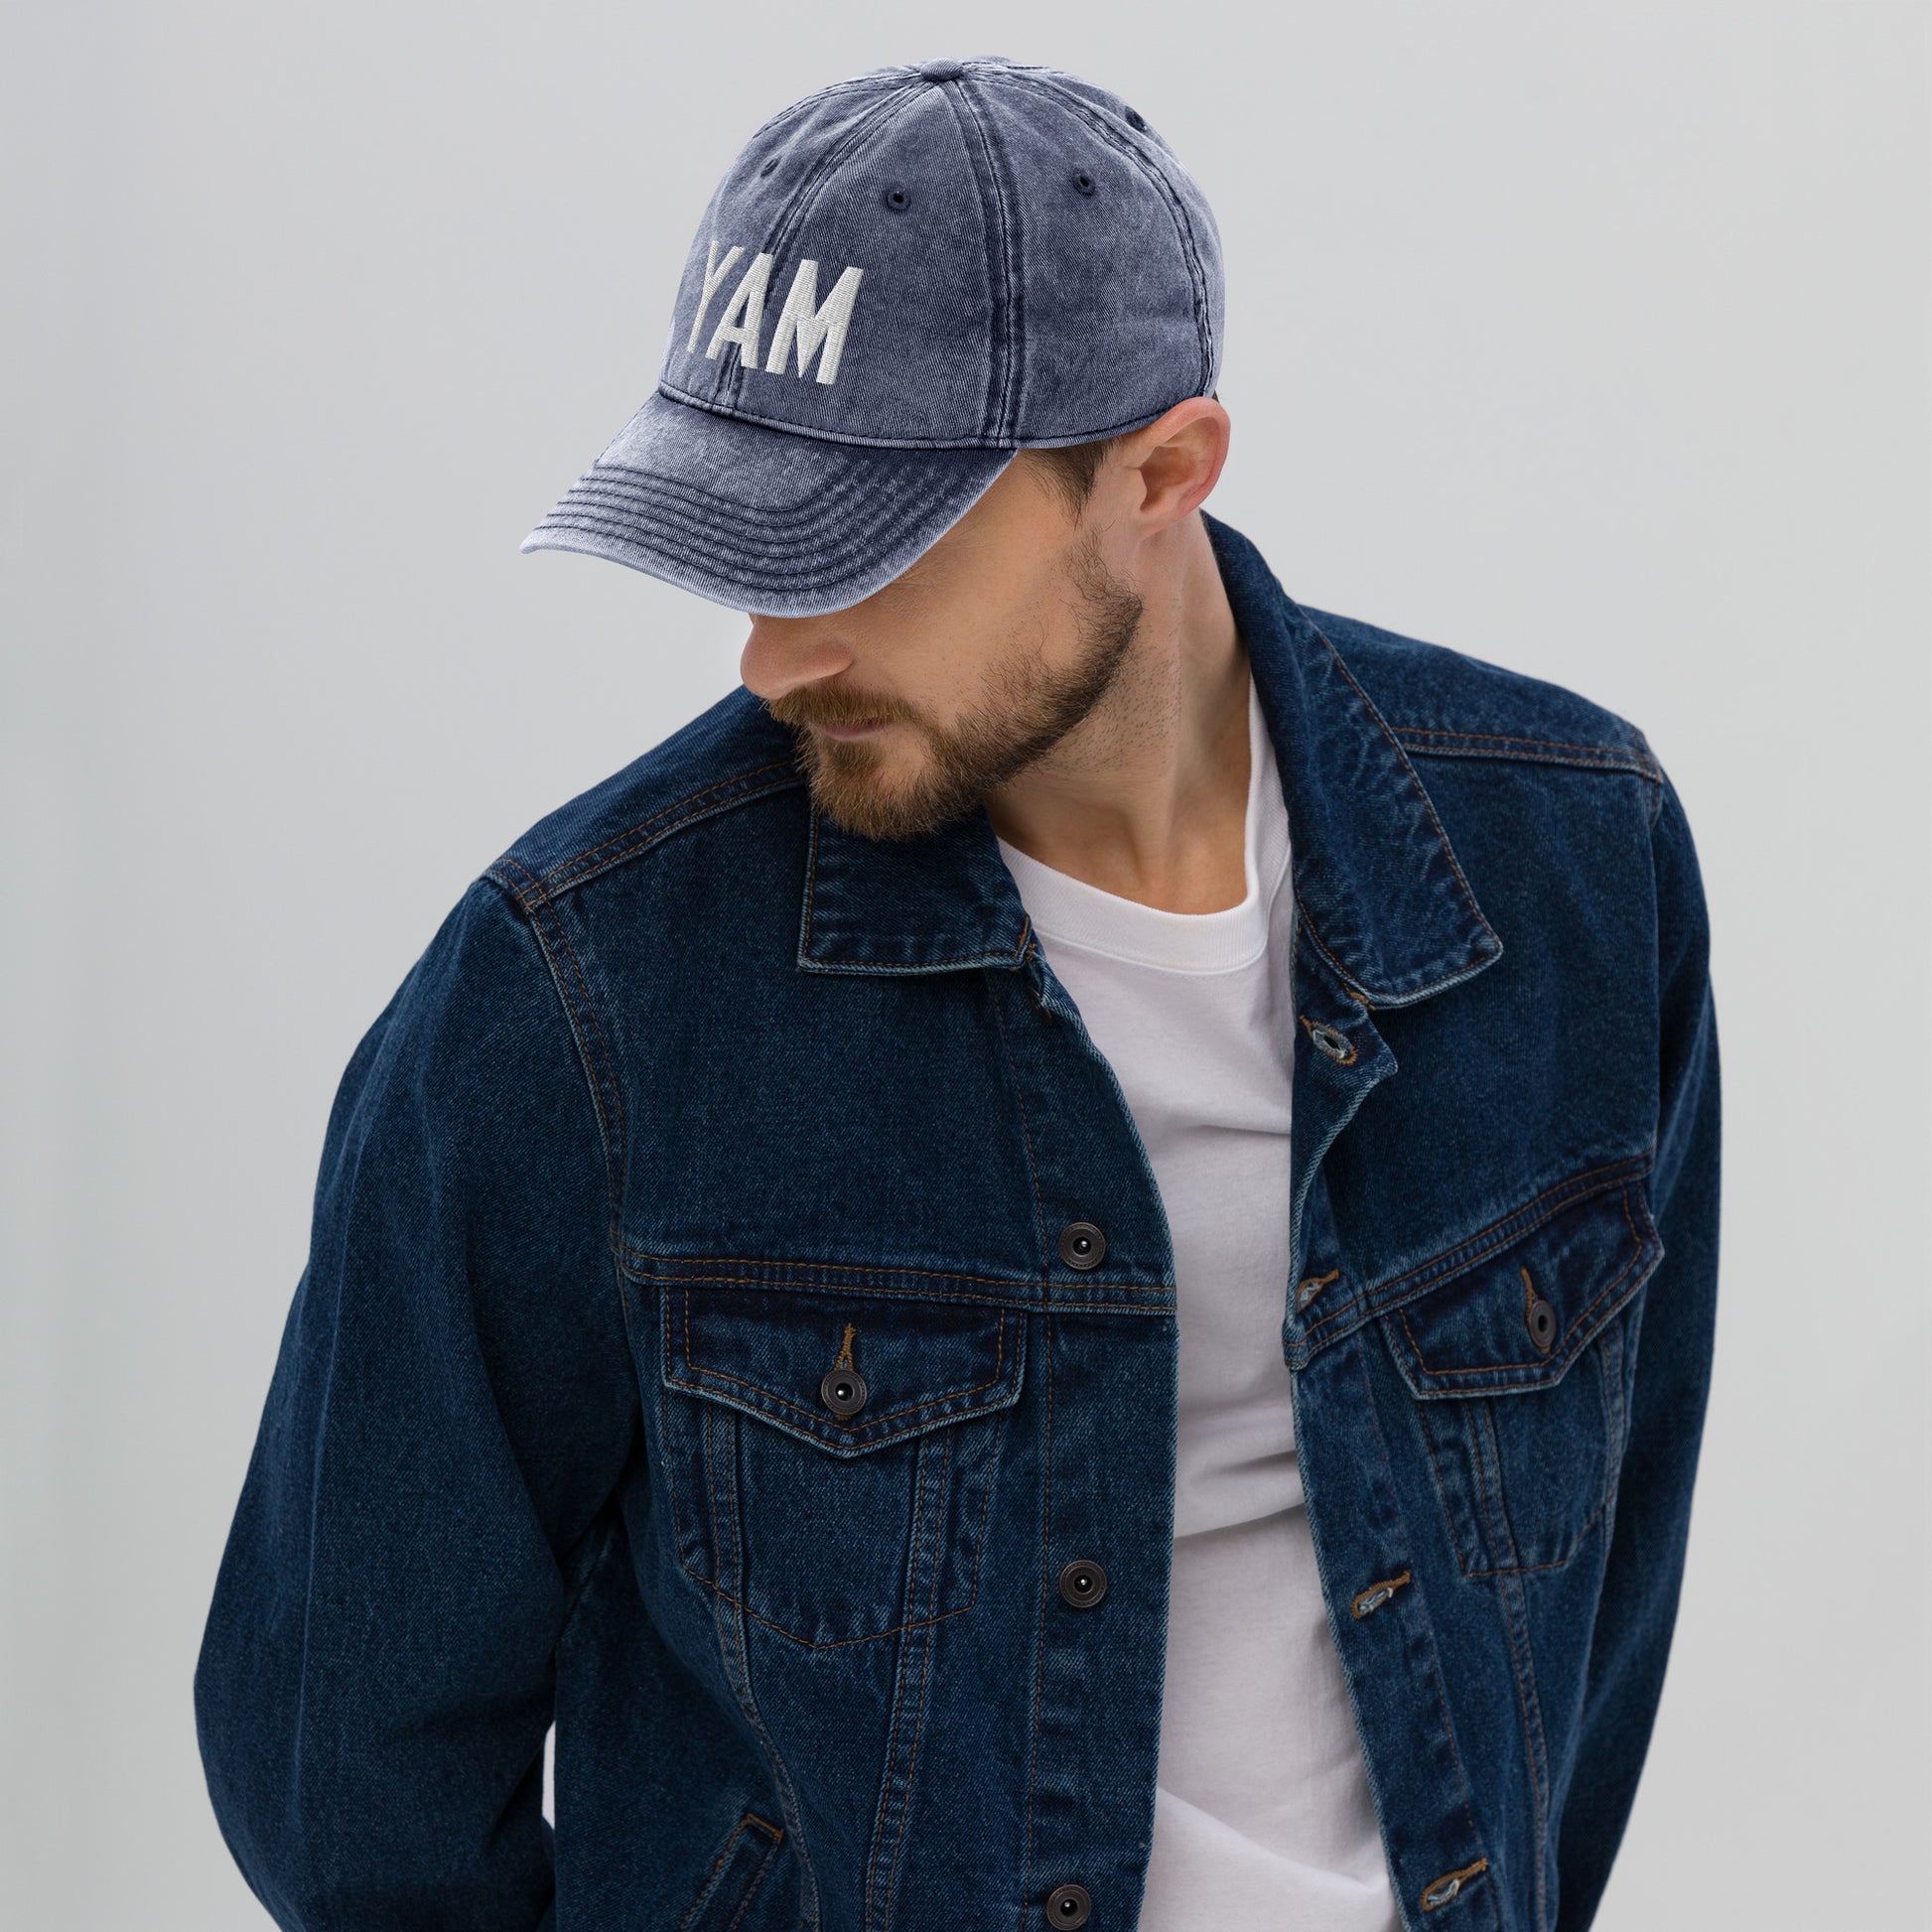 Airport Code Twill Cap - White • YAM Sault-Ste-Marie • YHM Designs - Image 04